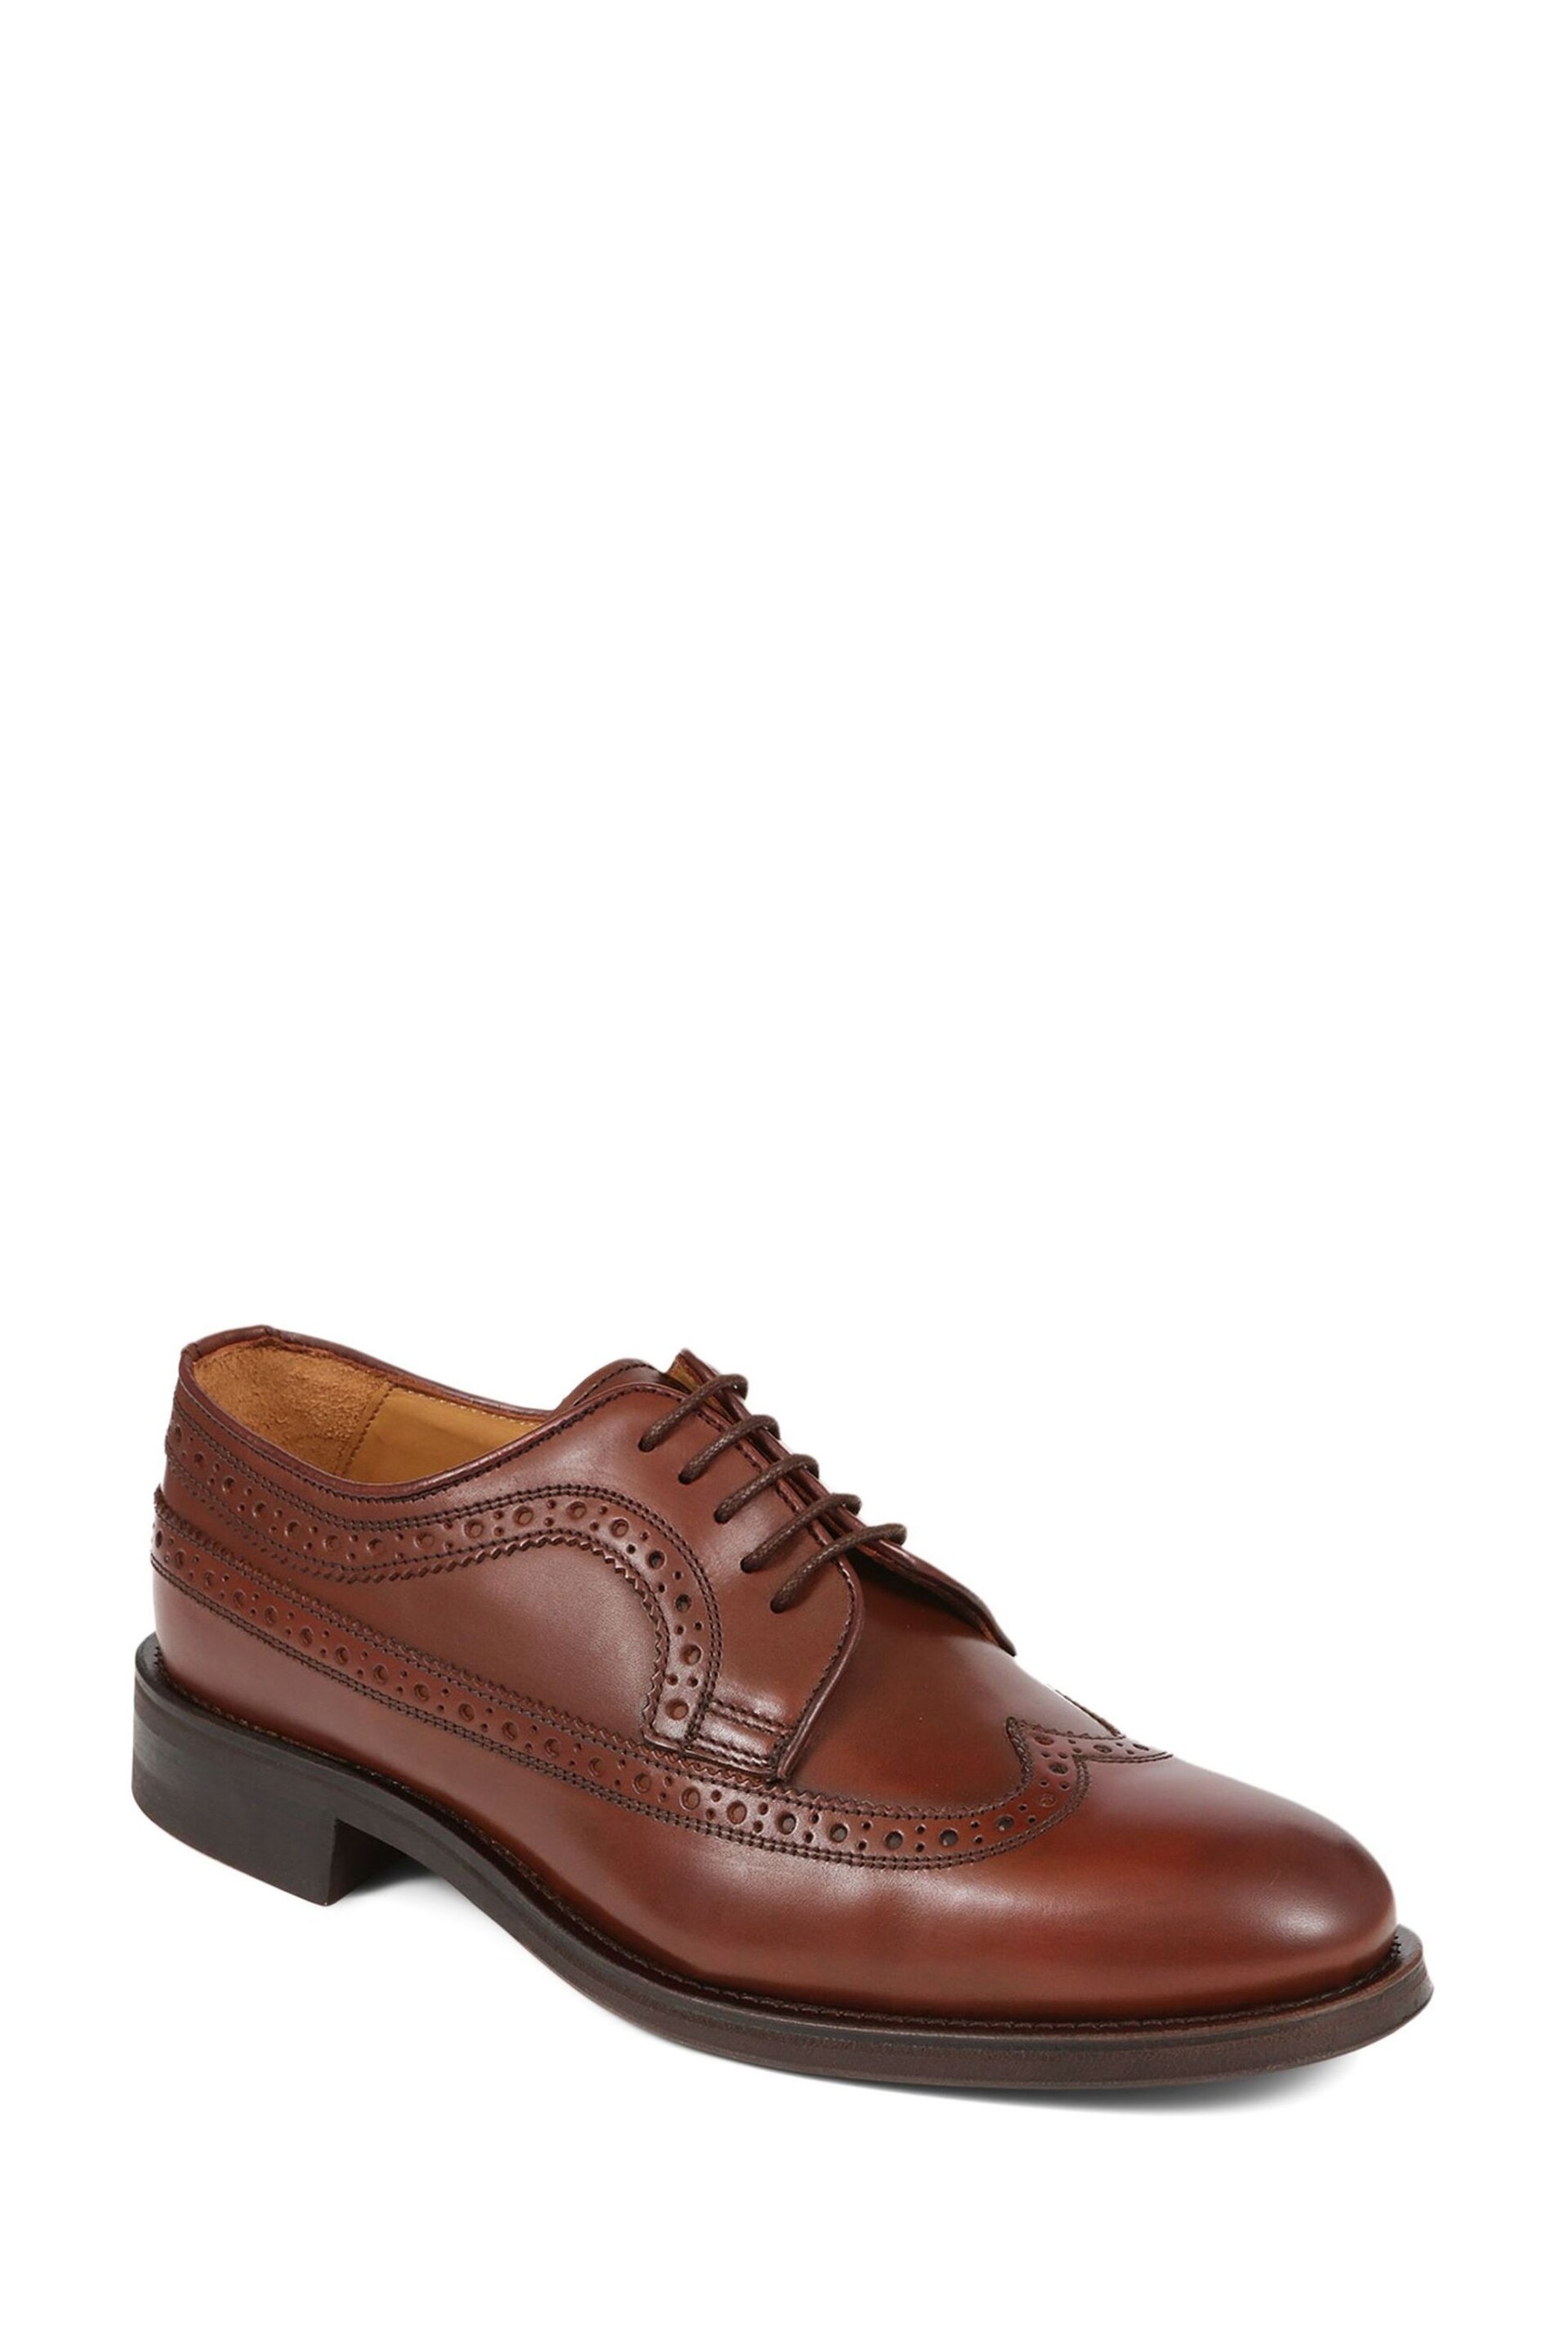 Jones Bootmaker Brogues Detailed Leather Brown Shoes - Image 2 of 5